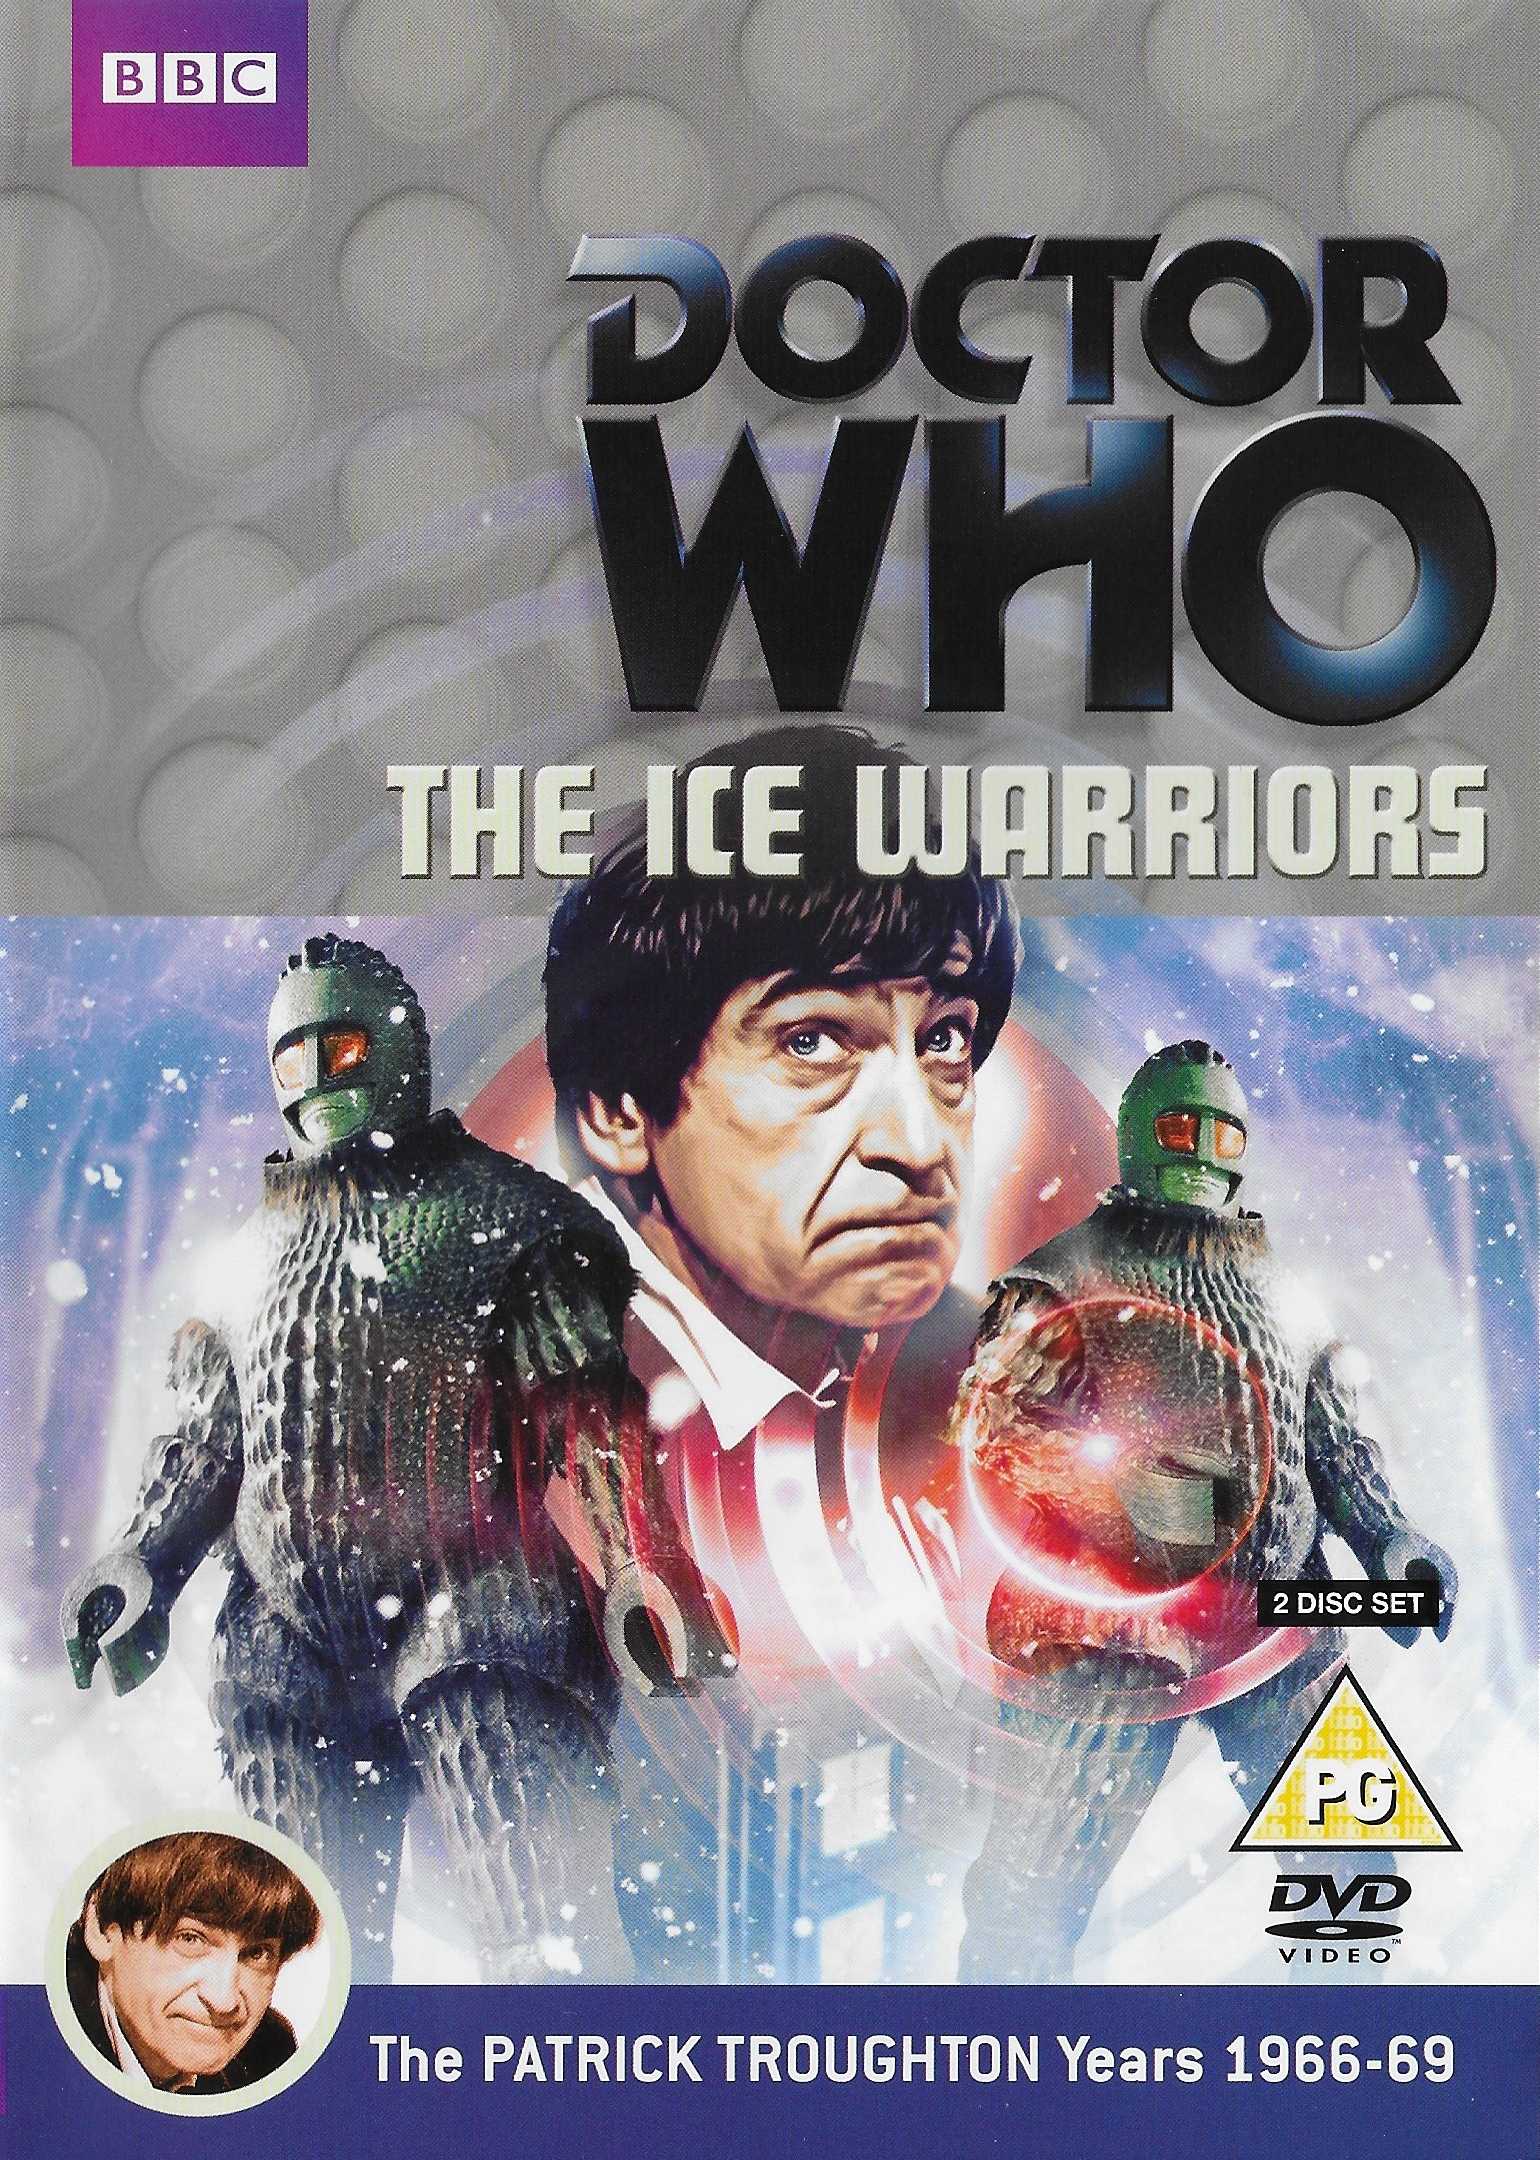 Picture of BBCDVD 3558 Doctor Who - The ice warriors by artist Brian Hayles from the BBC records and Tapes library